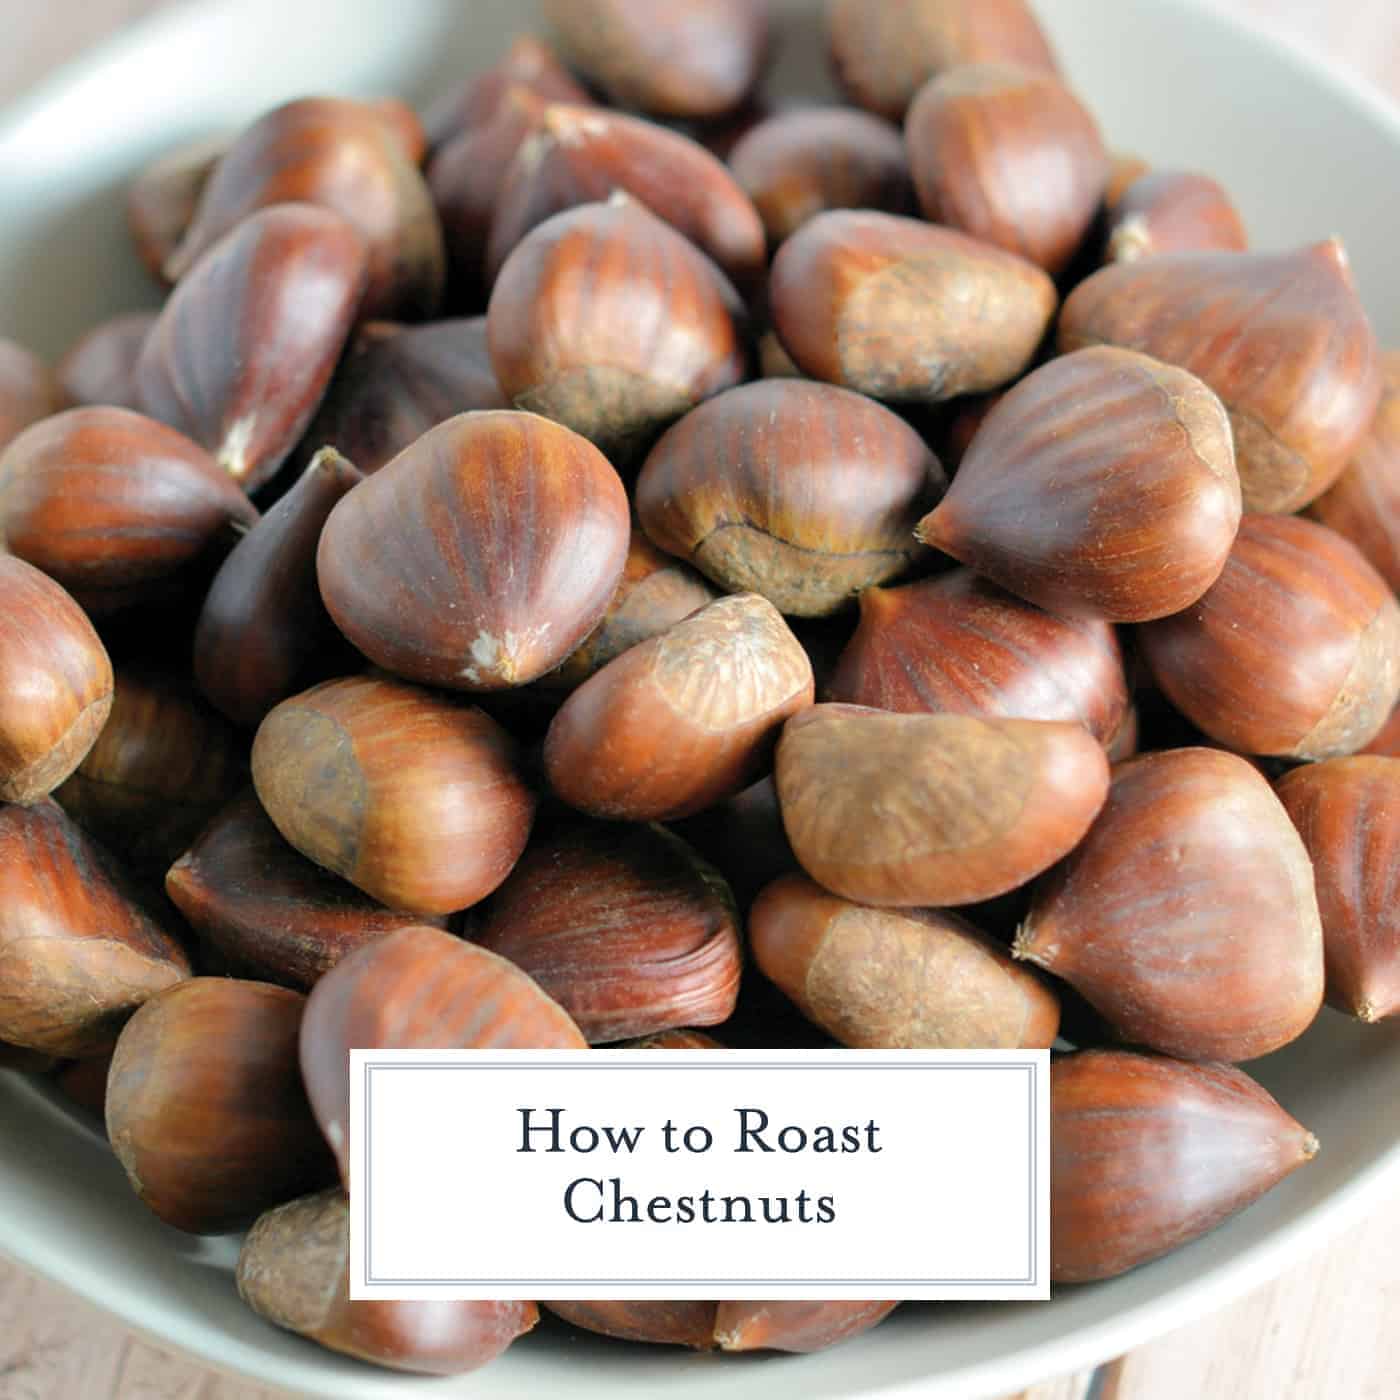 Ever wondered how to roast chestnuts? Here are step-by-step instructions on how to roast and peel chestnuts. #howtoroastchestnuts www.savoryexperiments.com 